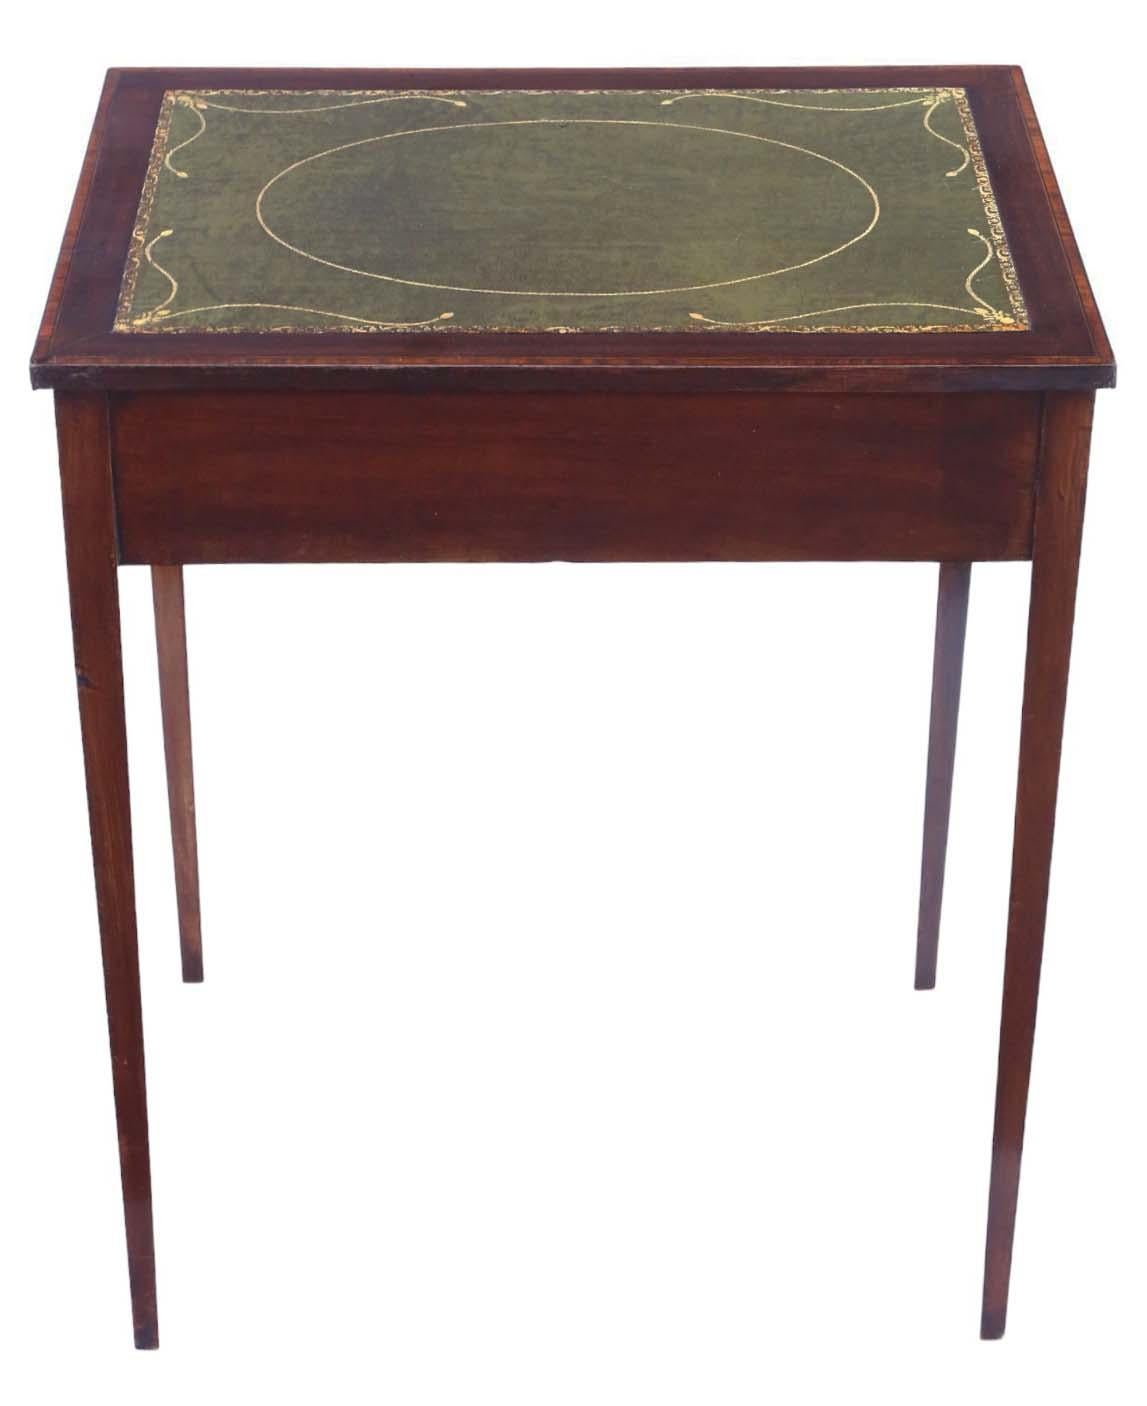 Antique Fine Quality C1900 Inlaid Mahogany Ladies Writing Table Desk Dressing For Sale 2